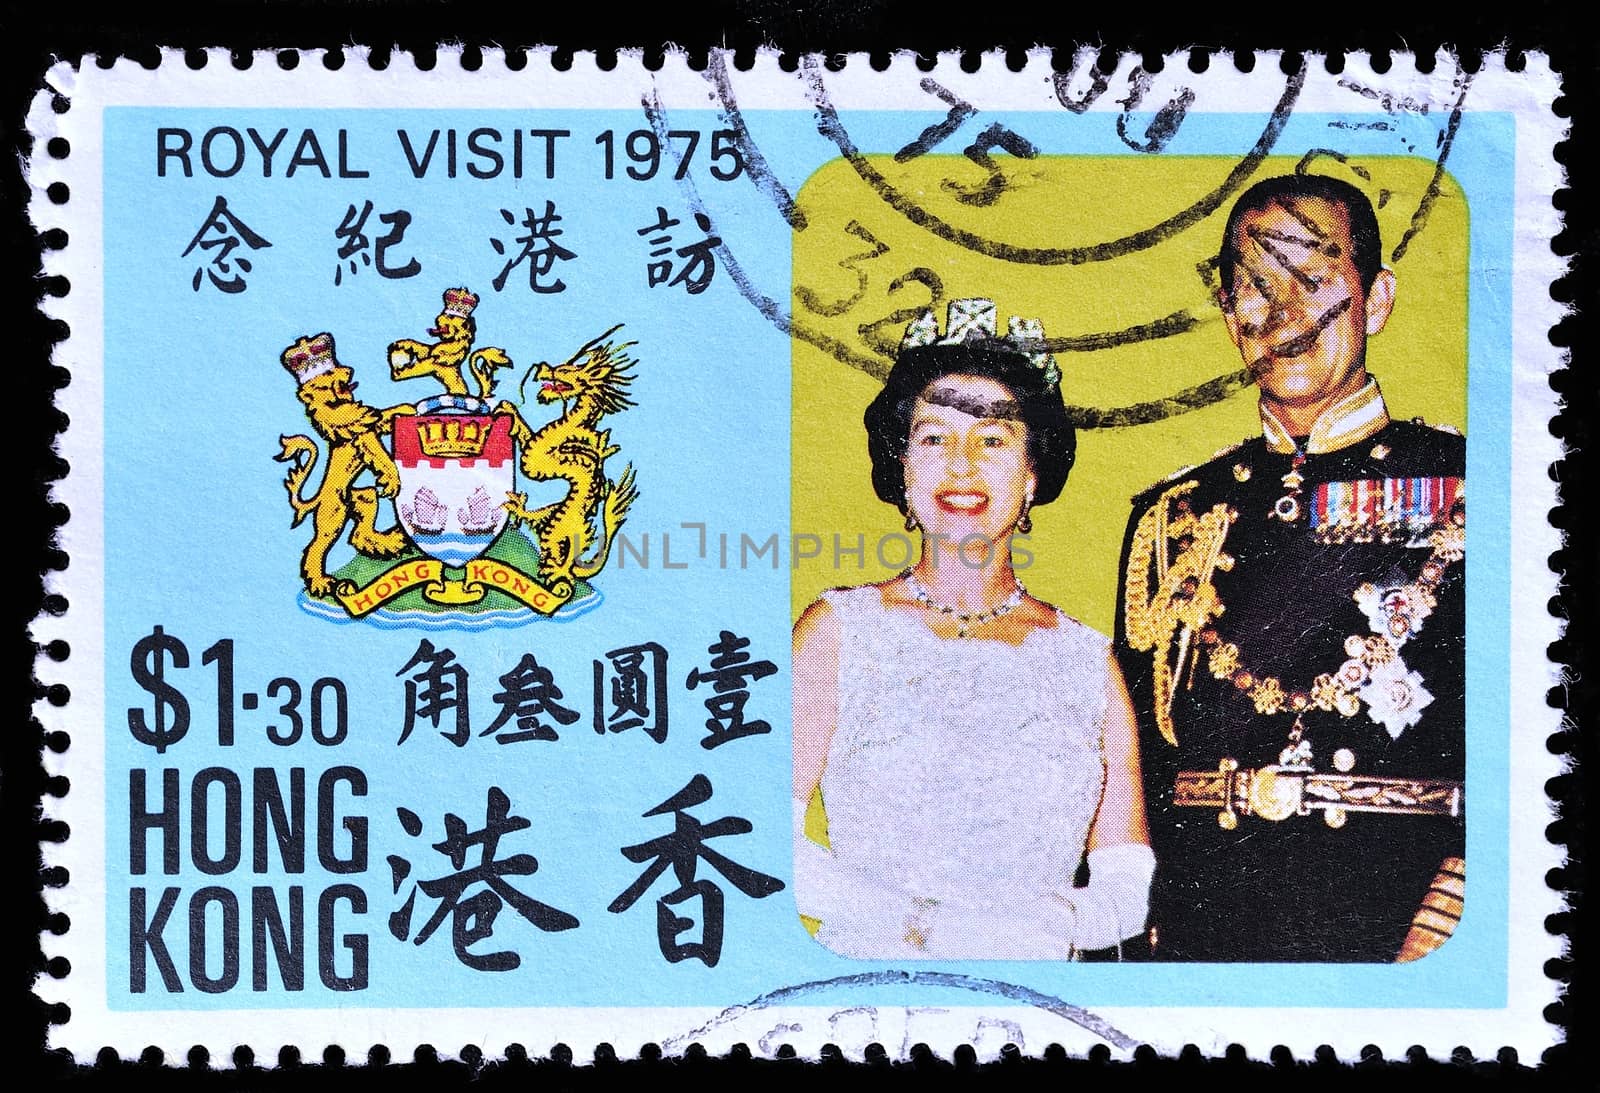 HONG KONG - CIRCA 1975: A stamp printed in the Hong Kong dedicated to the visit of Queen Elizabeth II and Prince Philip, shows a portrait of the, coat of arms of Hong Kong, circa 1975